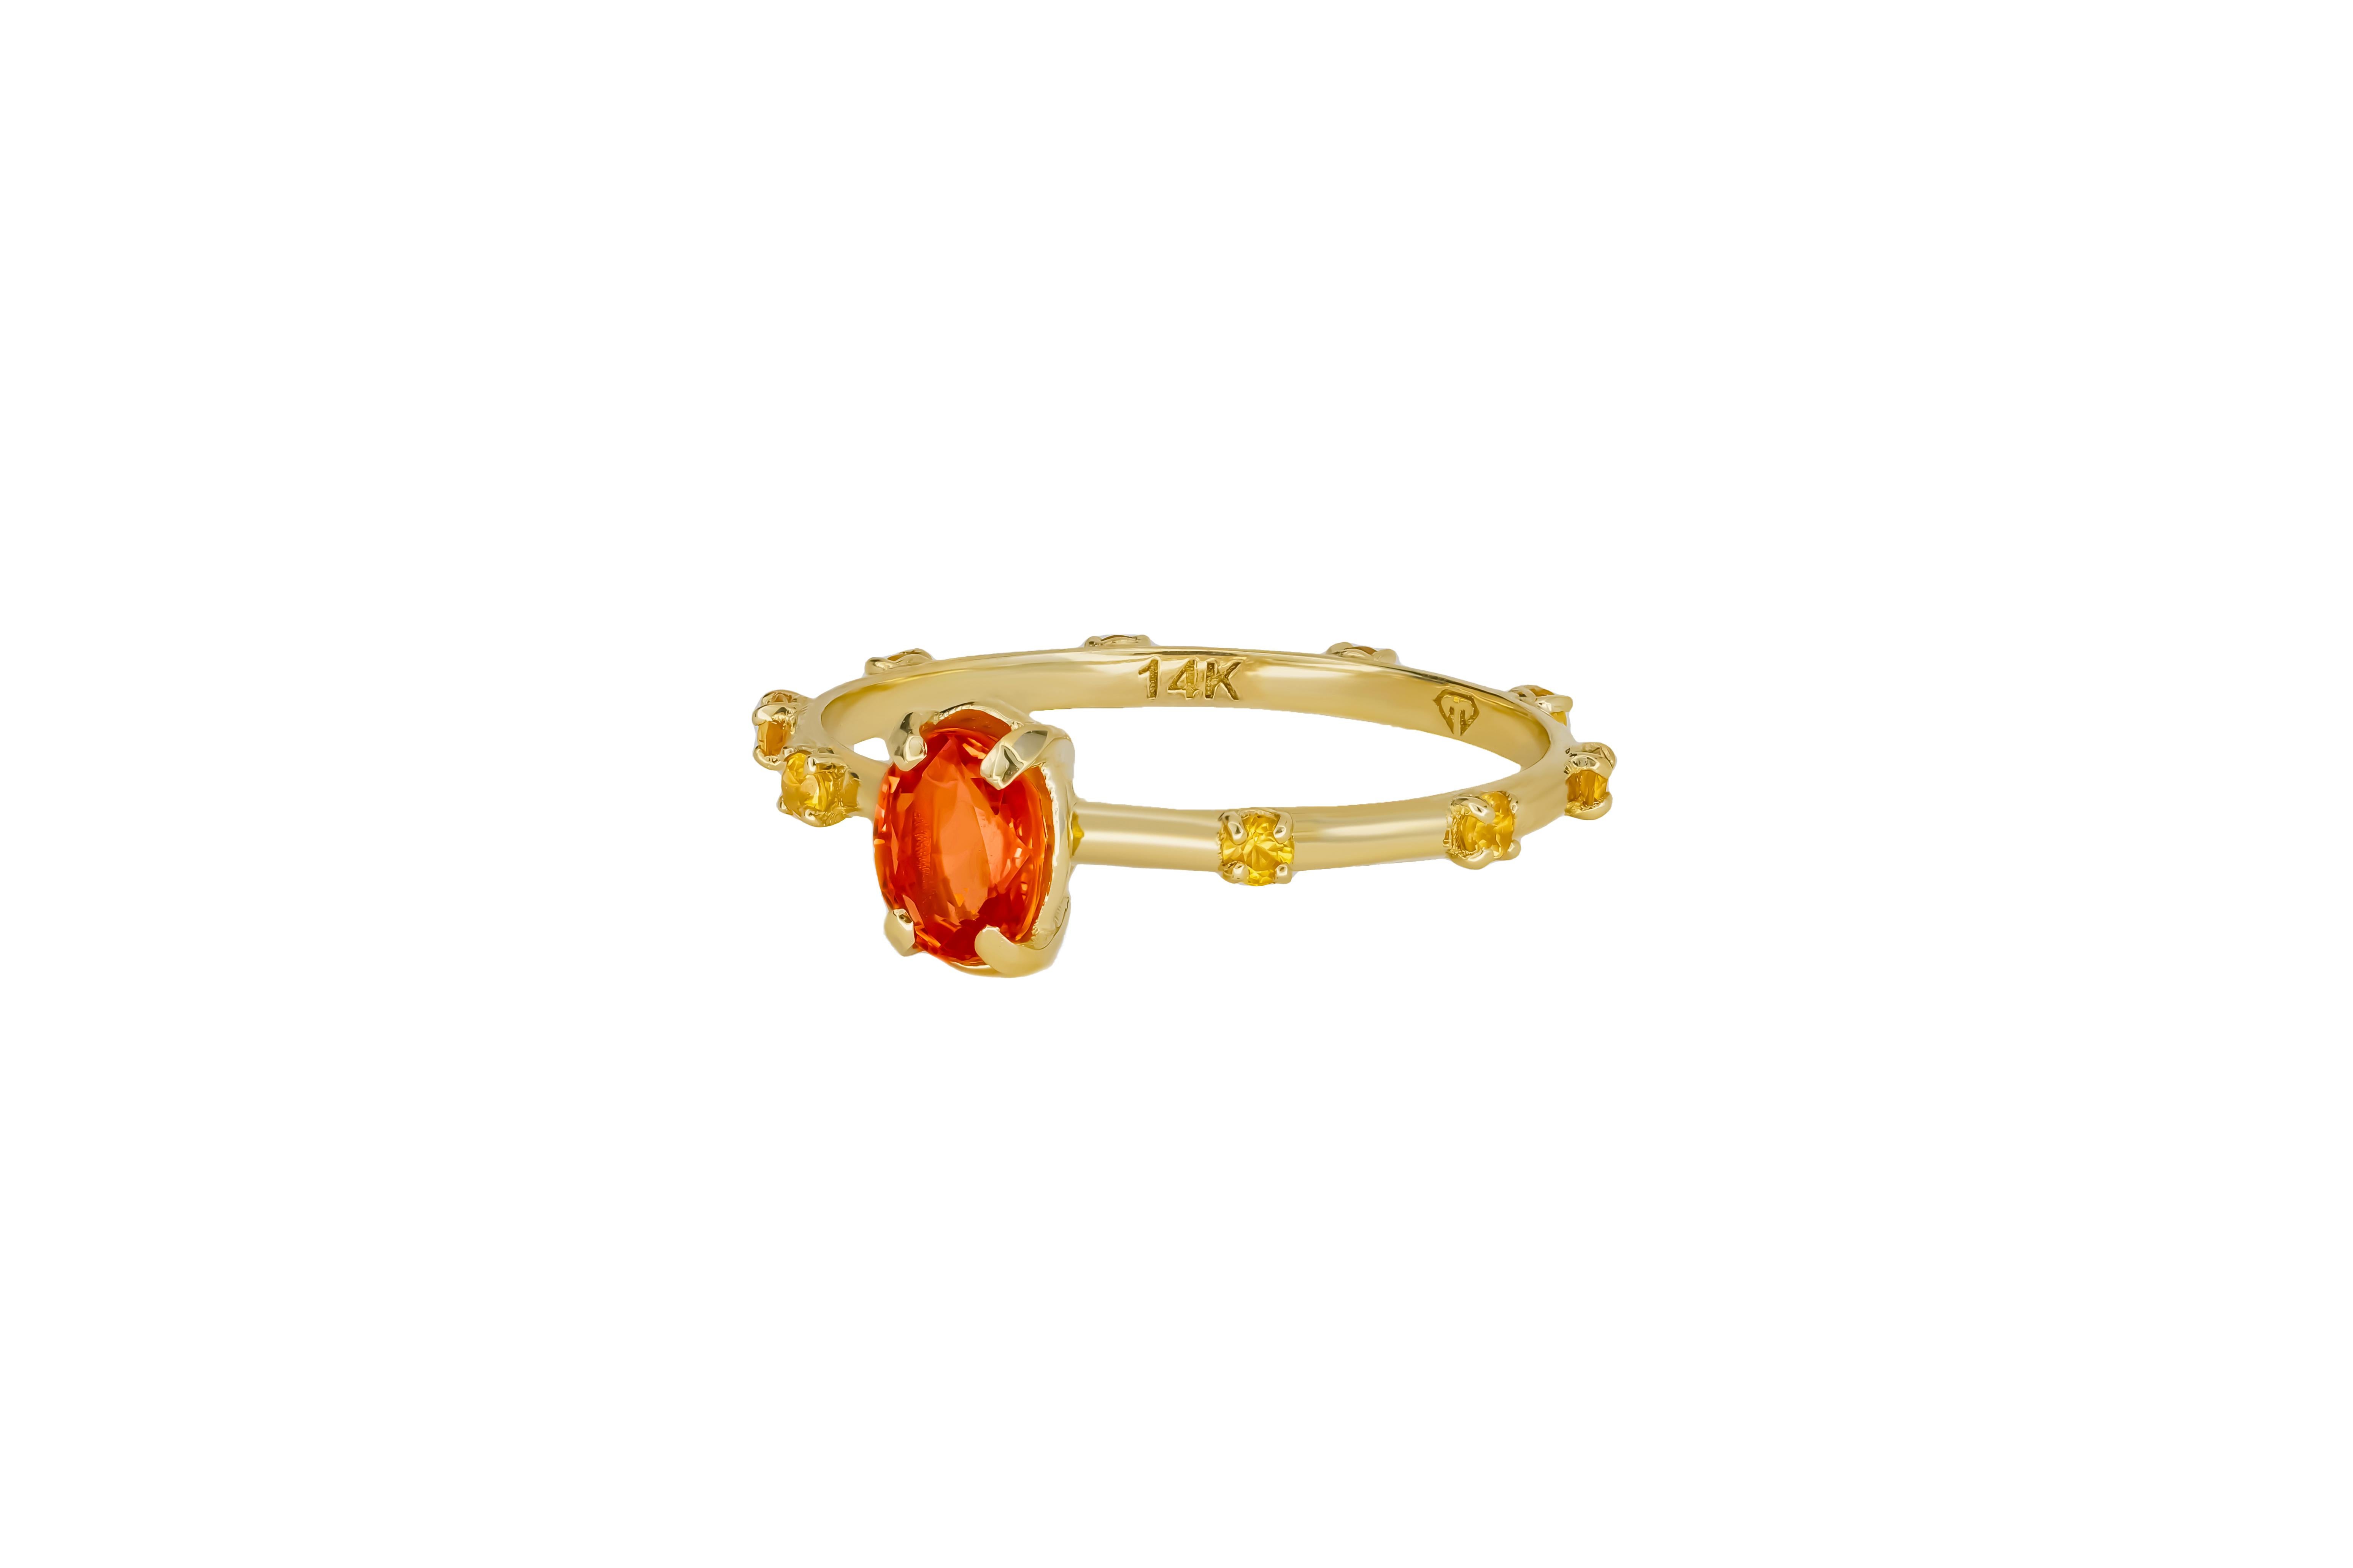 For Sale:  Peach color gemstone 14k gold ring. 4